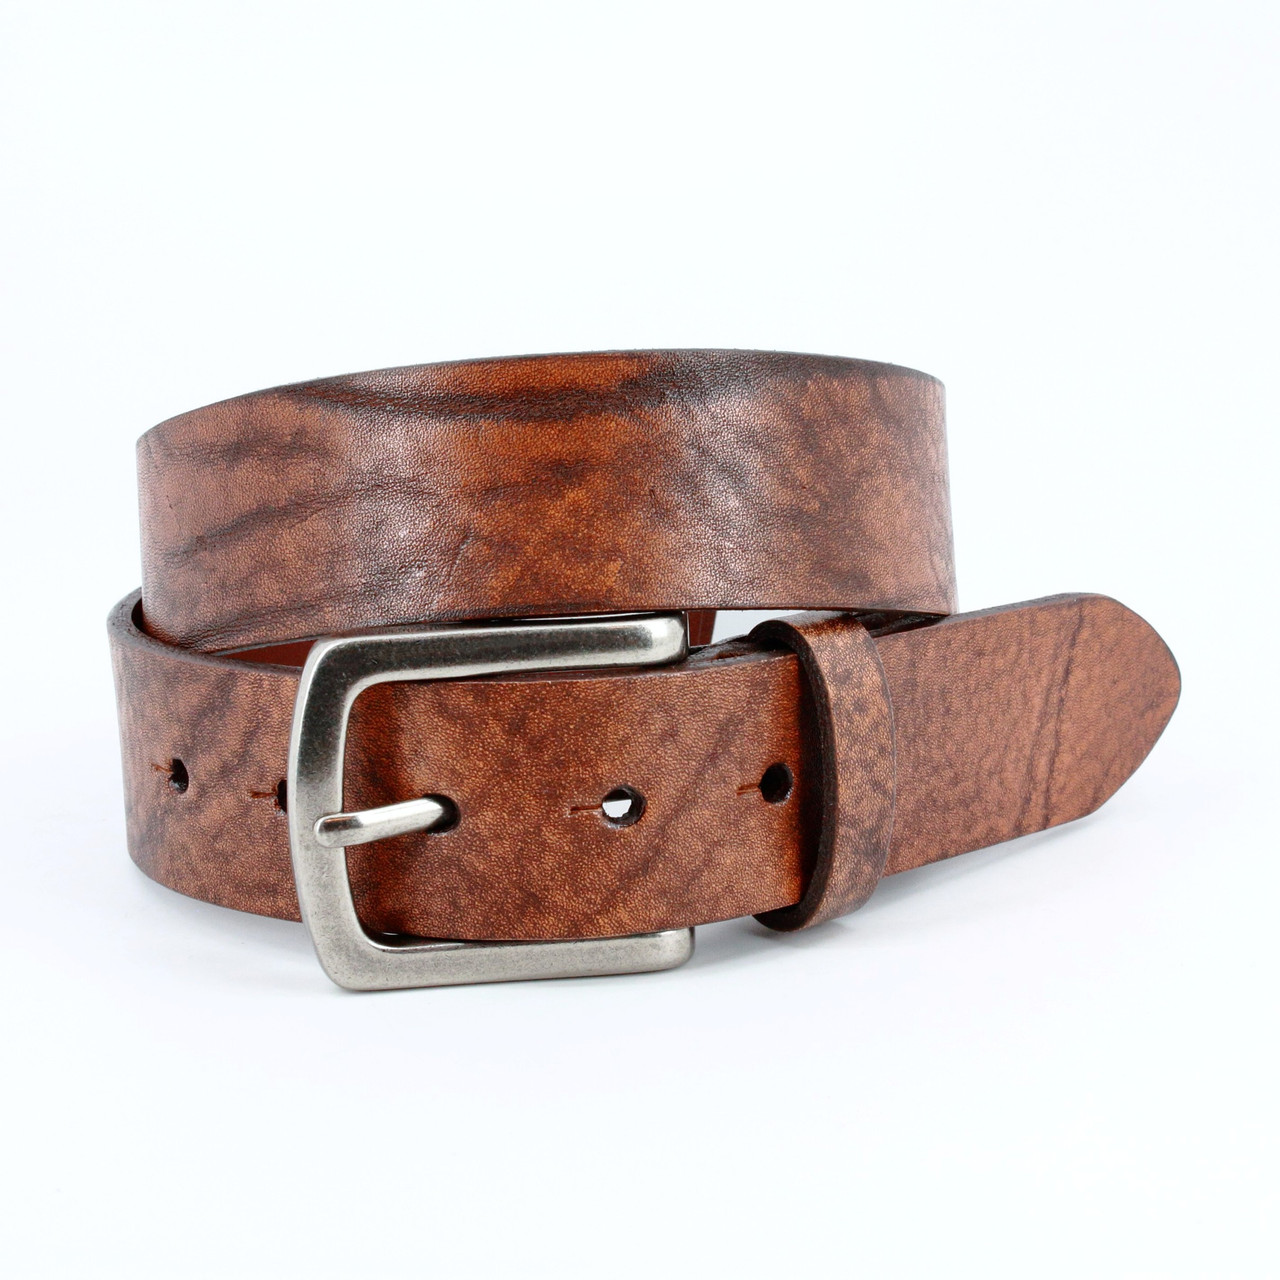 Distressed Tumbled Harness Leather Casual Belt in Honey with Brown